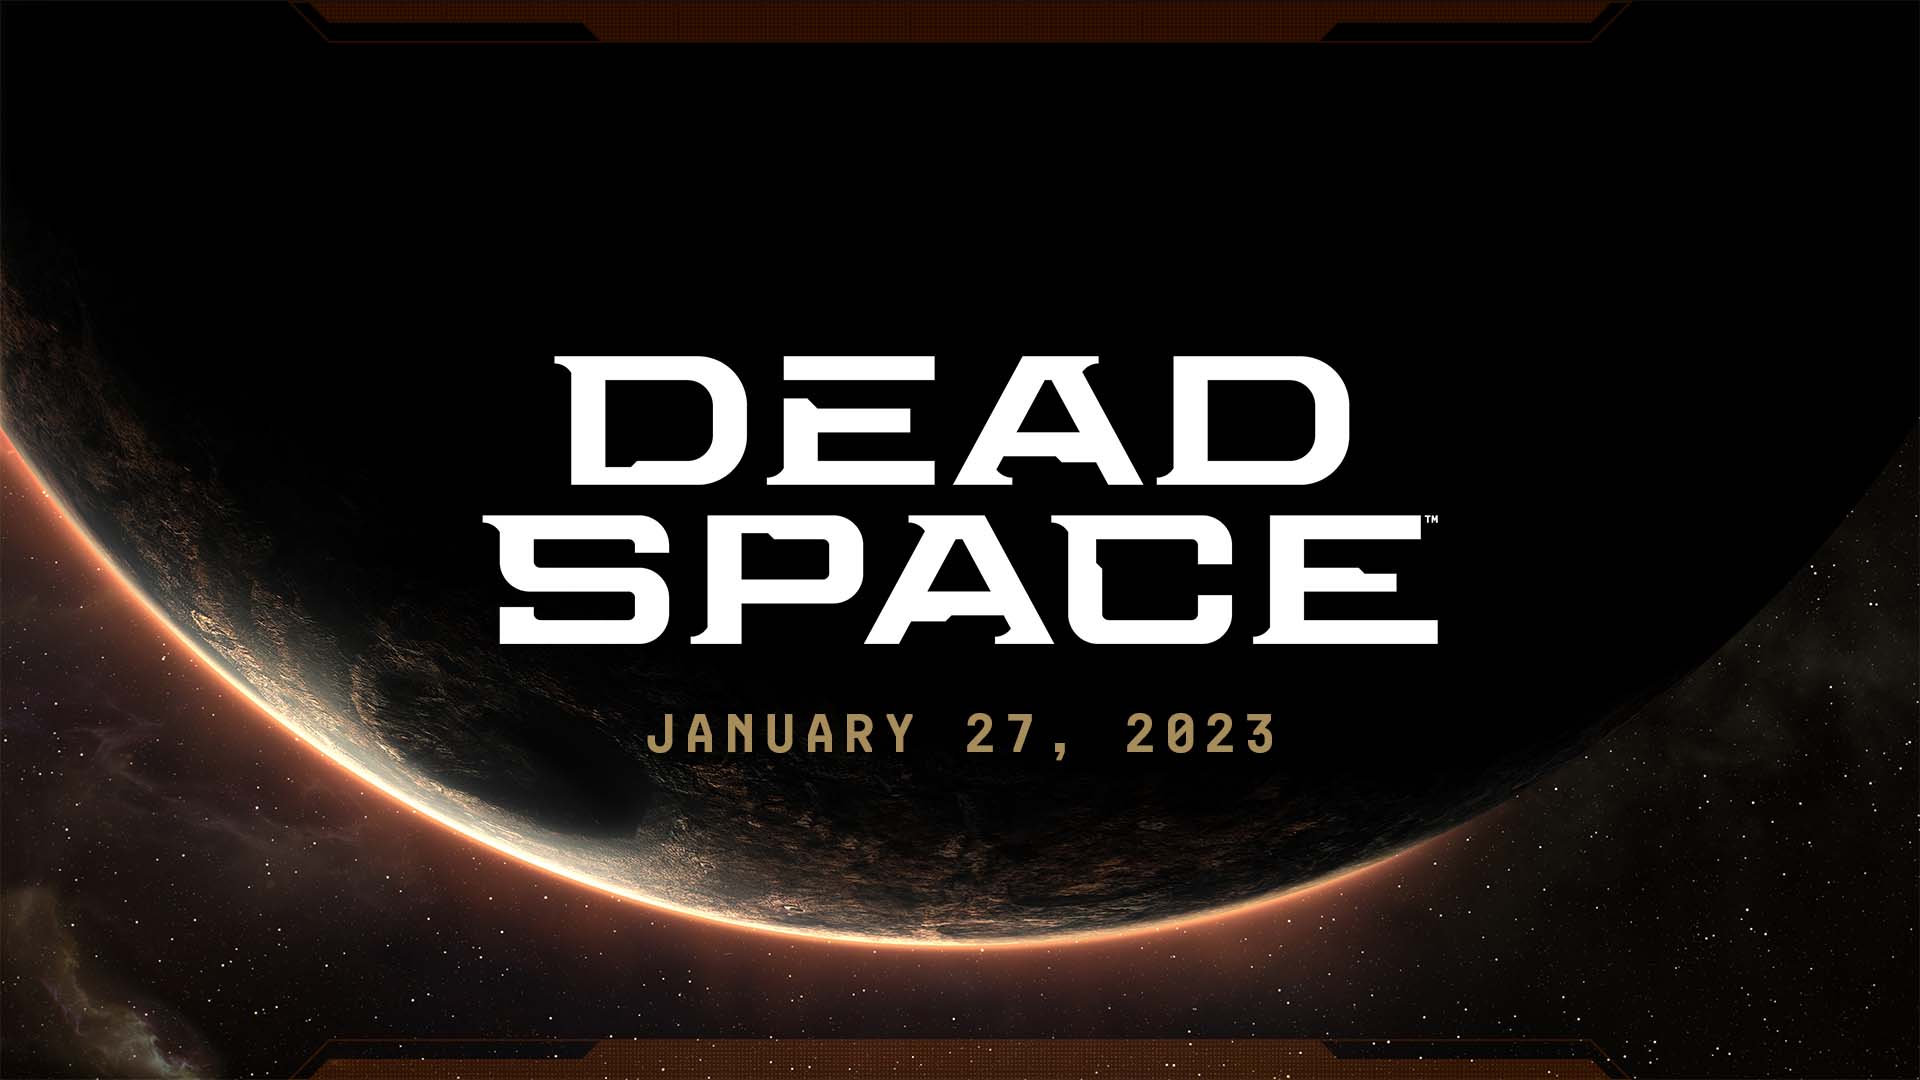 Dead Space Remake will be officially released on January 27, 2023, GamersRD